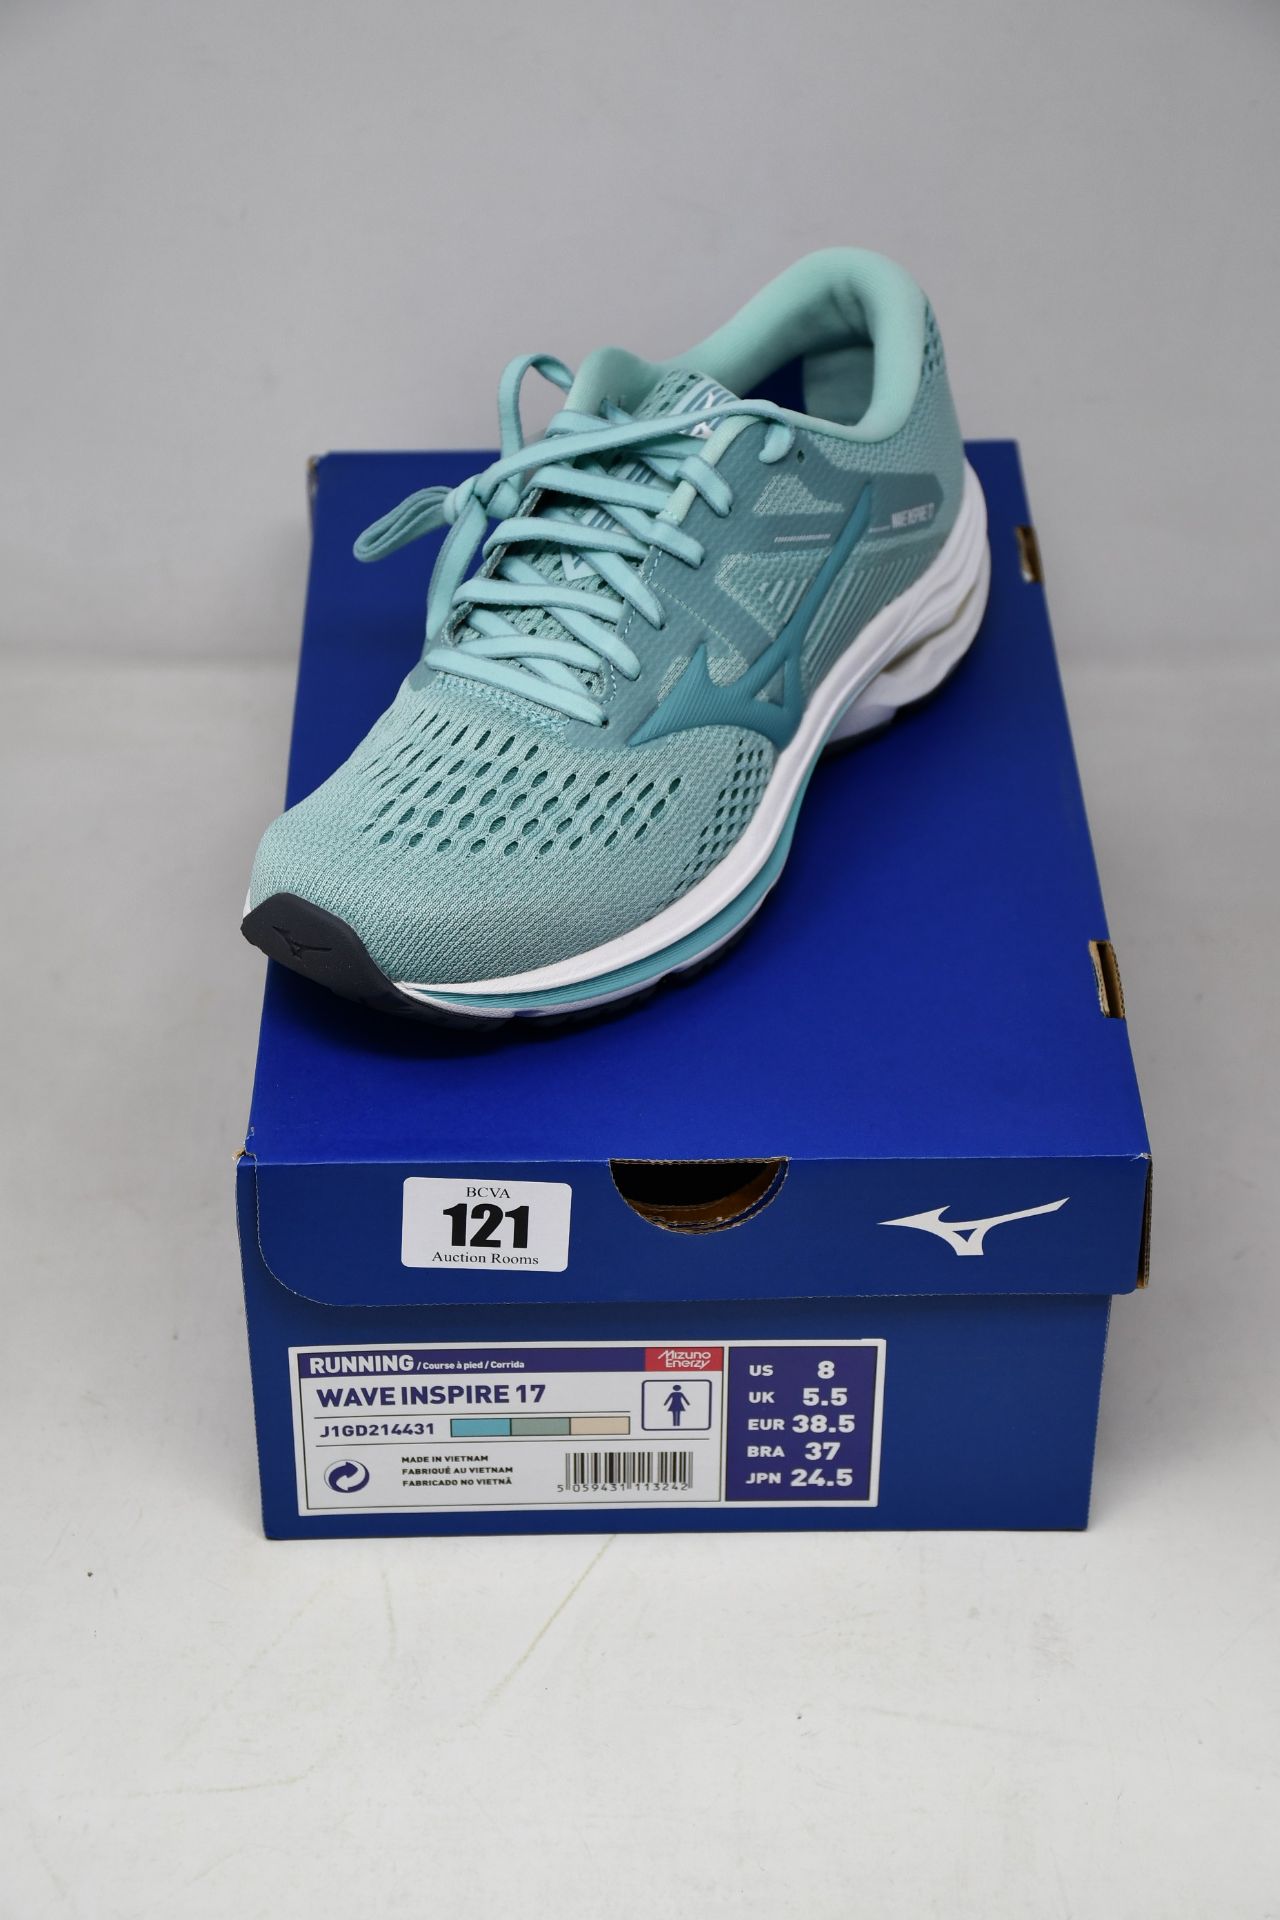 A pair of women's as new Mizuno Wave Inspire 17 trainers (UK 5.5).